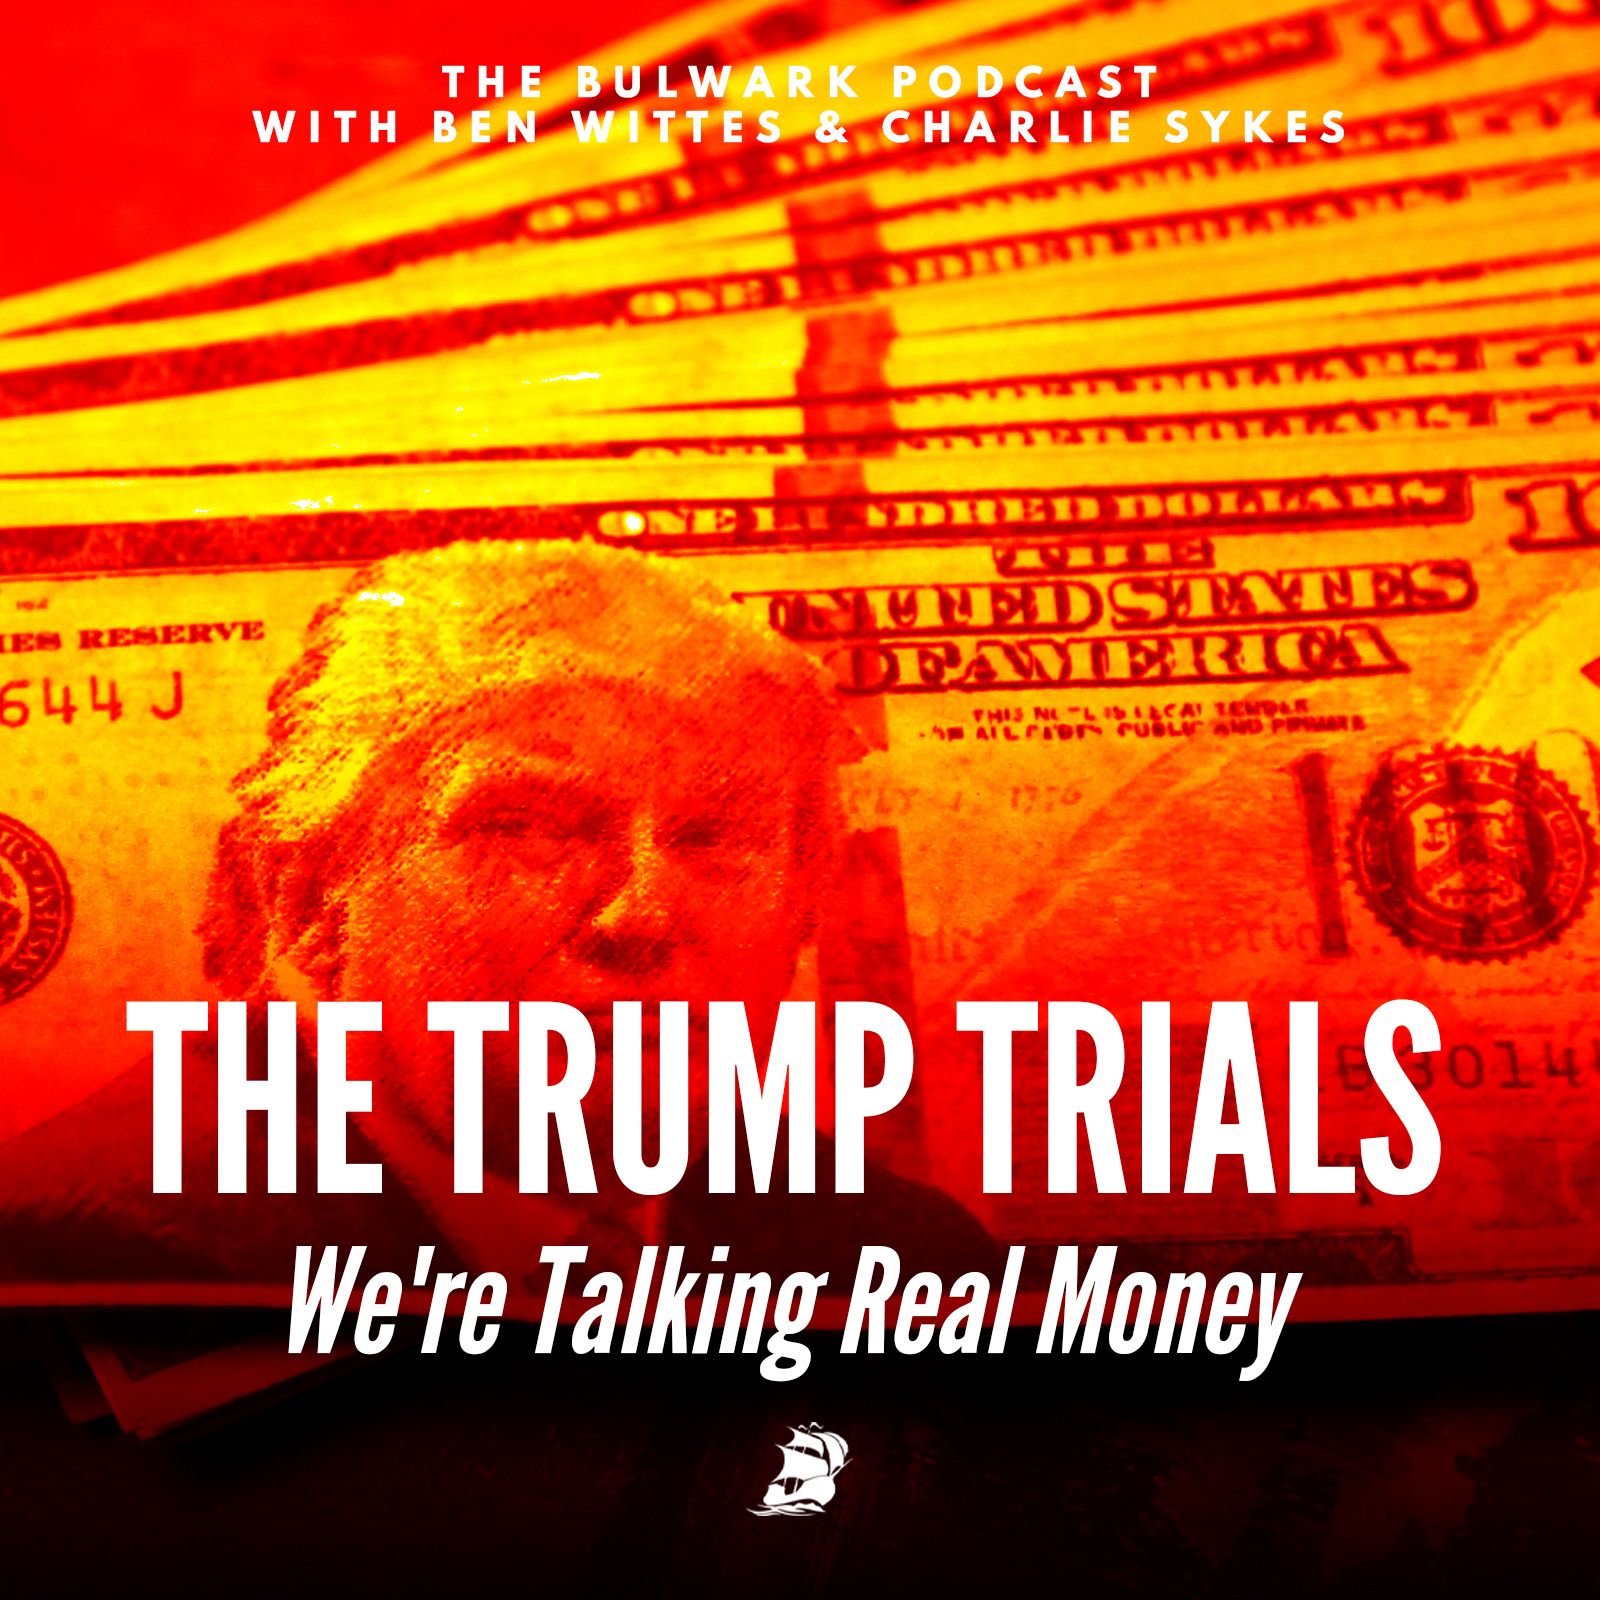 We're Talking Real Money by The Bulwark Podcast